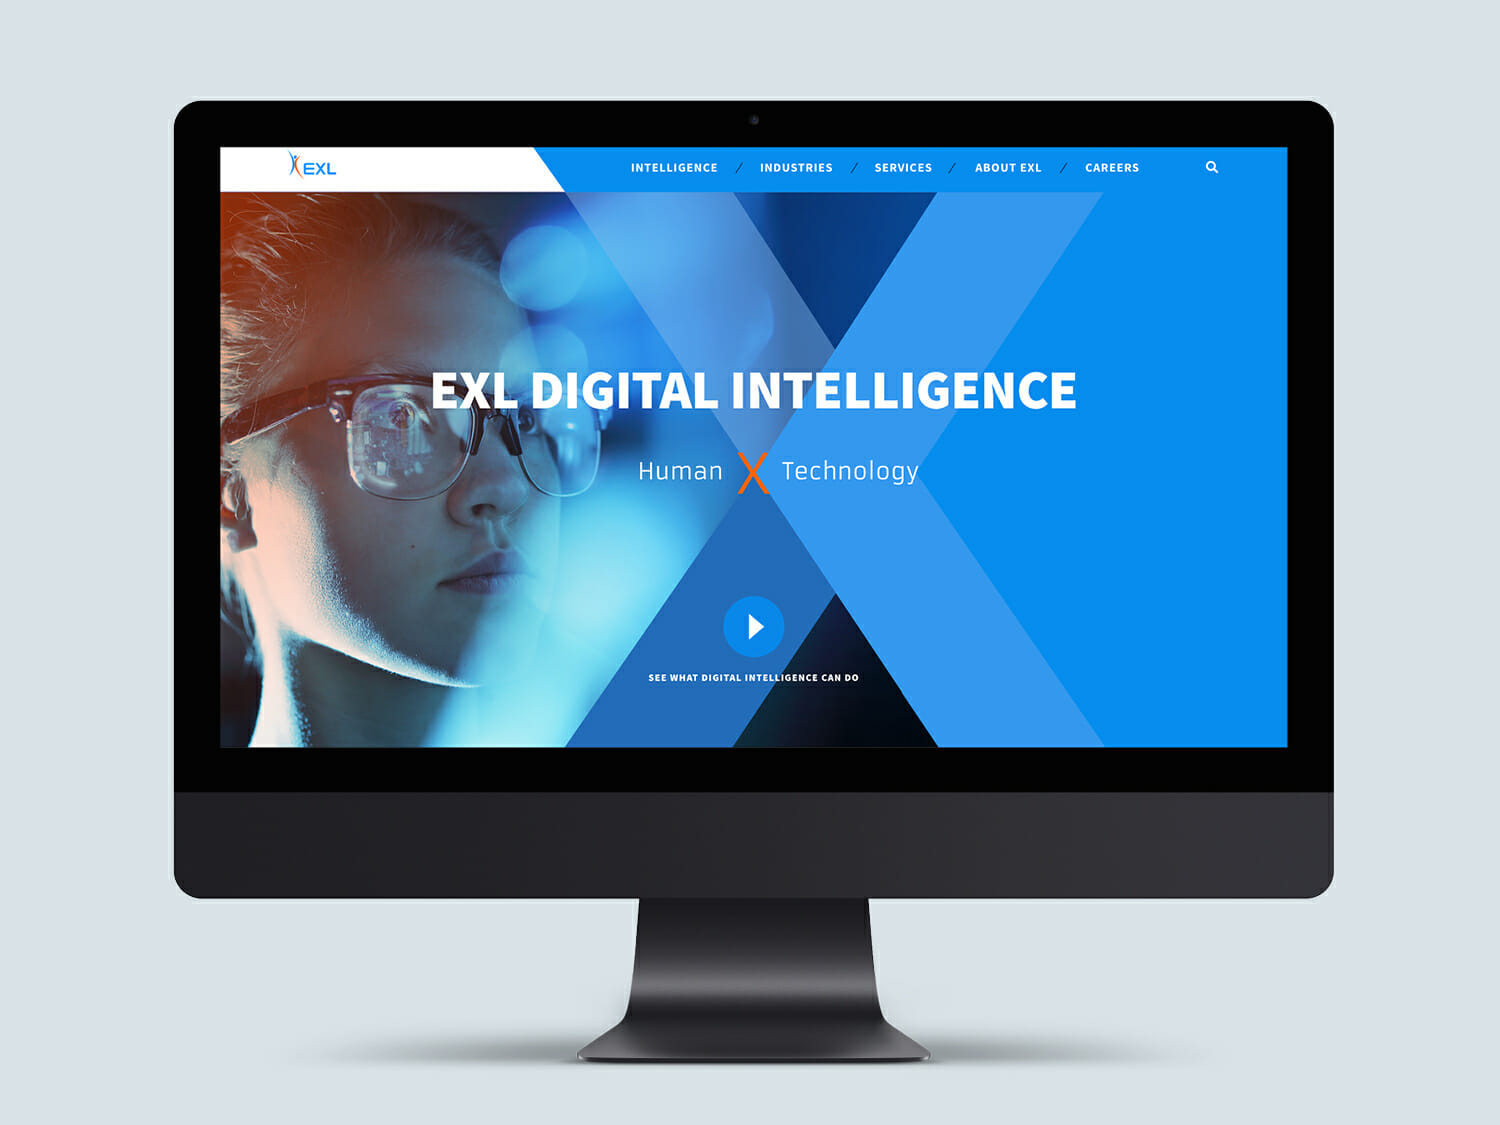 exl digital intelligence home page shown on desktop, woman with glasses